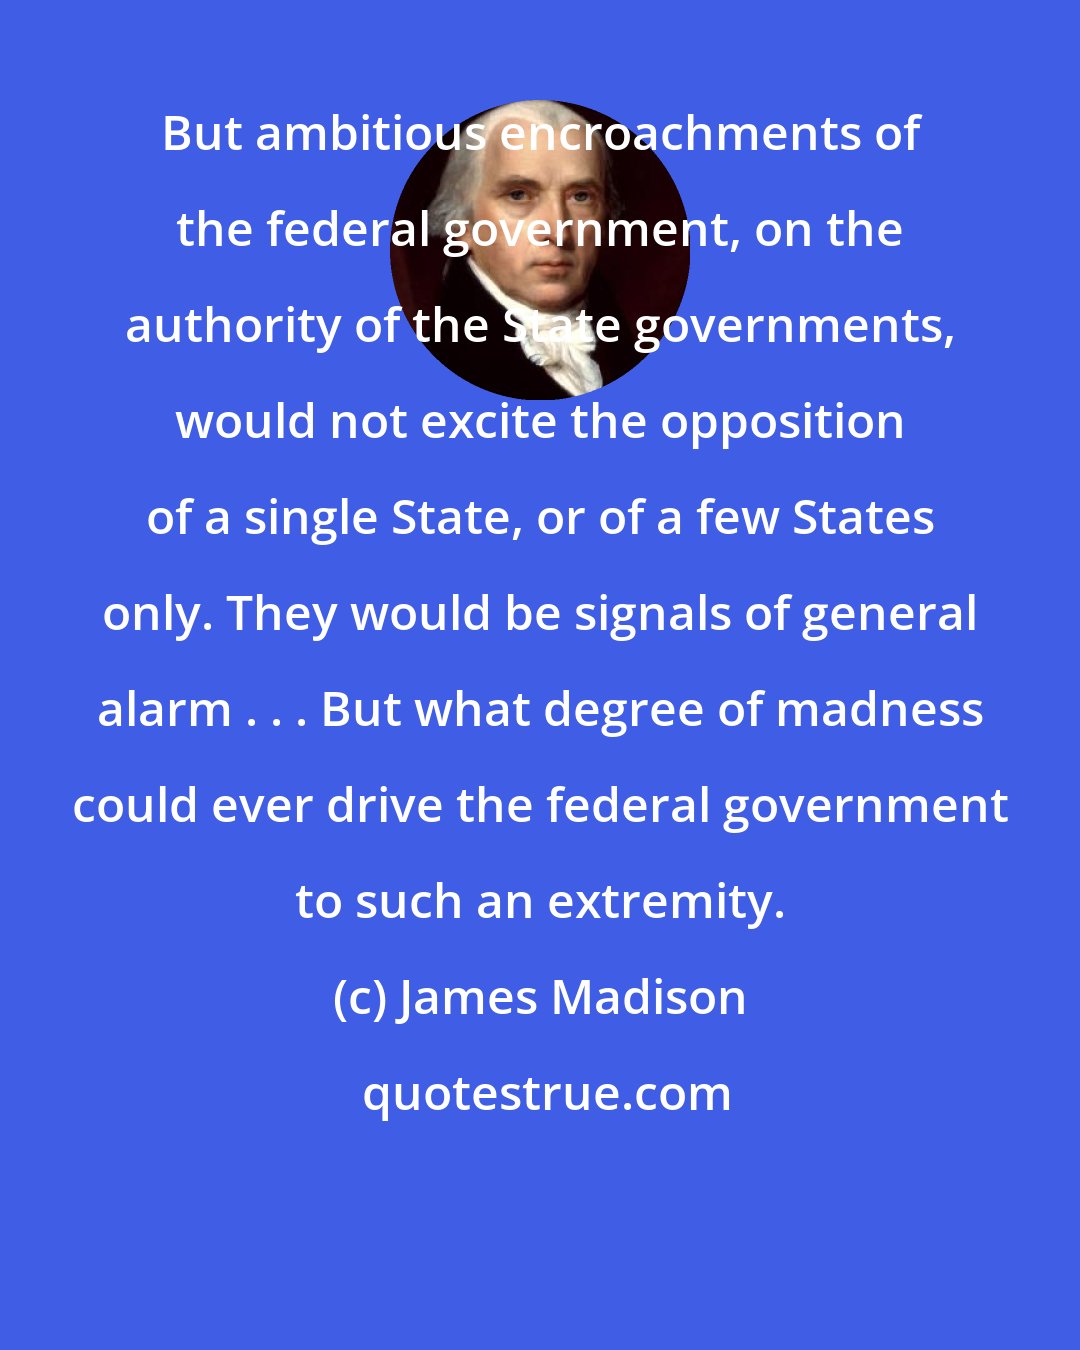 James Madison: But ambitious encroachments of the federal government, on the authority of the State governments, would not excite the opposition of a single State, or of a few States only. They would be signals of general alarm . . . But what degree of madness could ever drive the federal government to such an extremity.